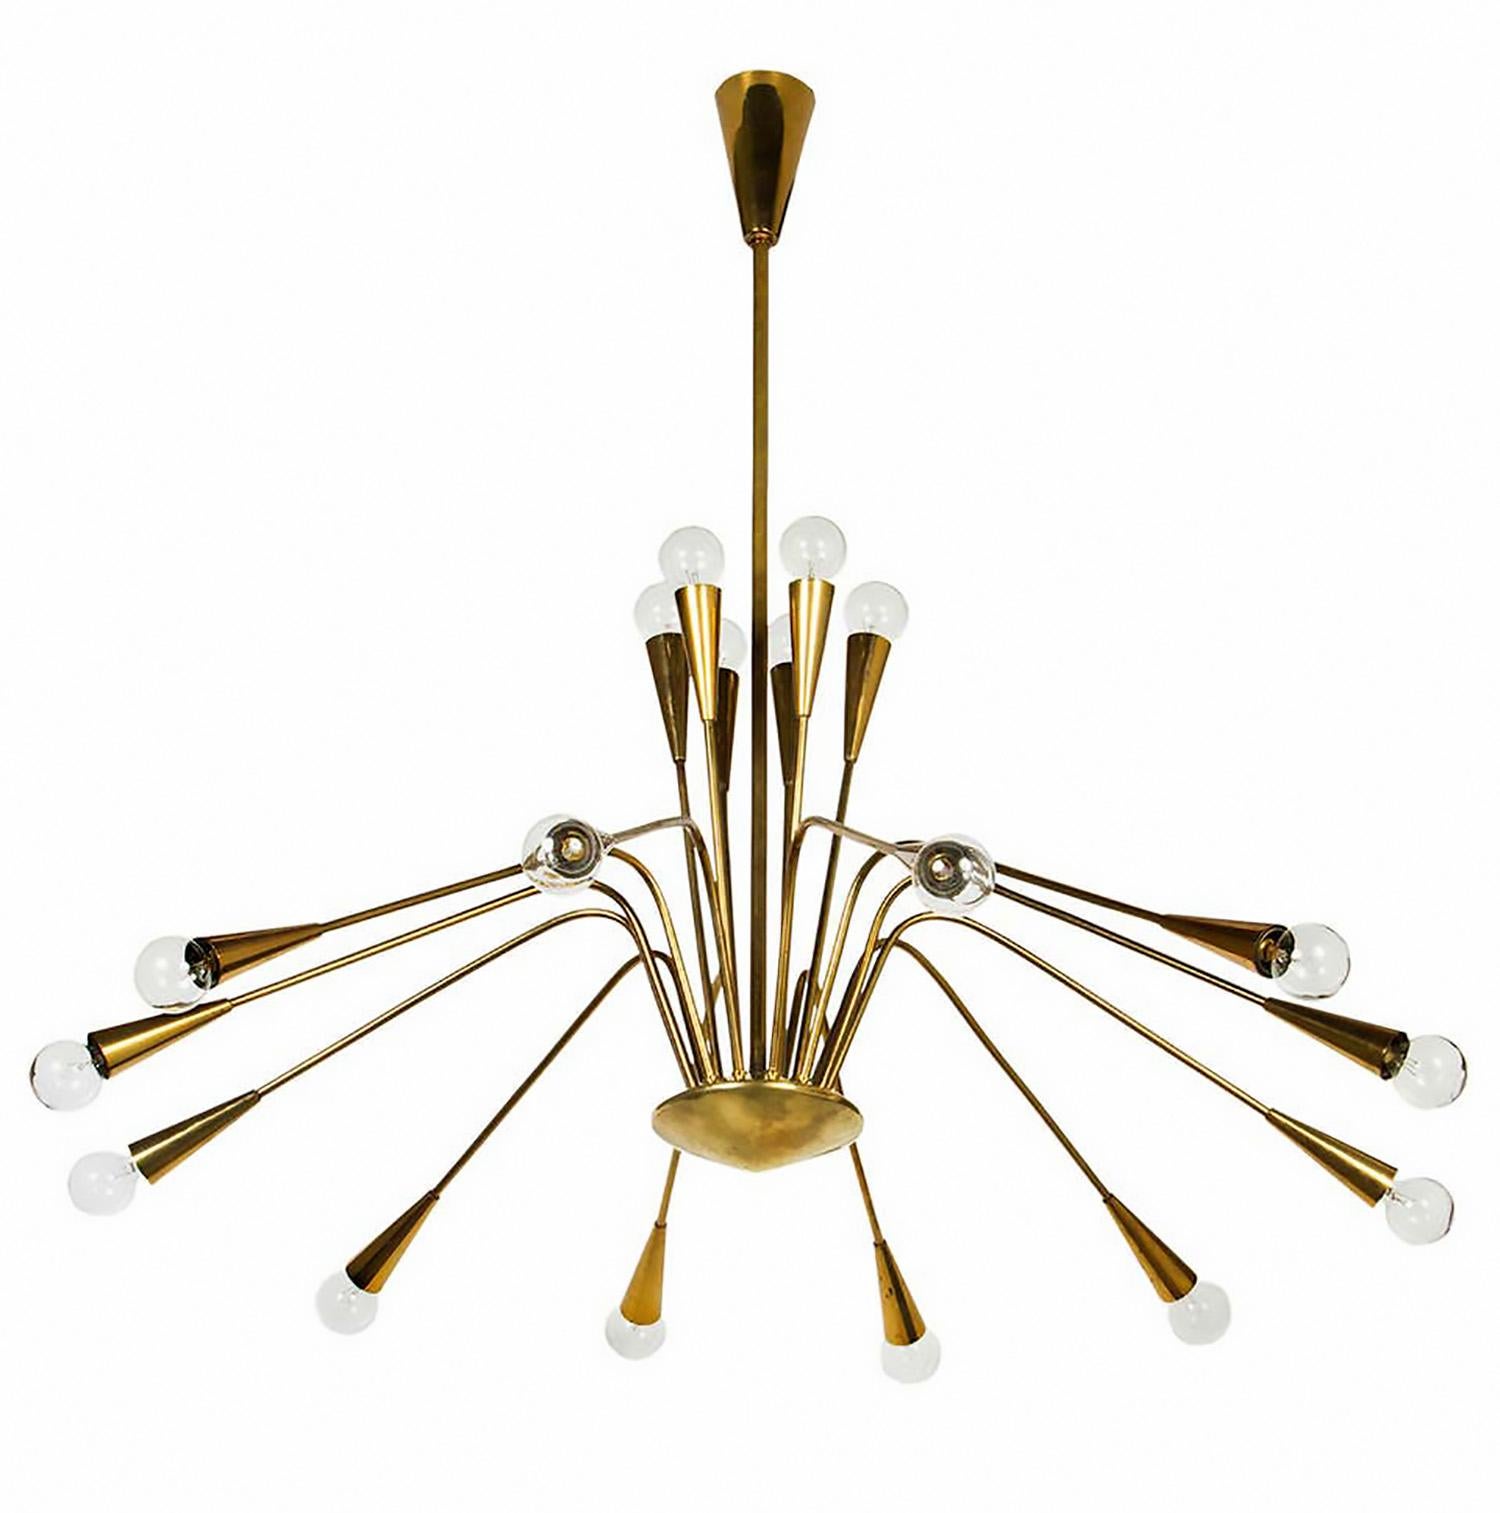 Brass chandelier designed by Oscar Torlasco (1934-2004), with eighteen light points.
Lumi production from the 1950s.